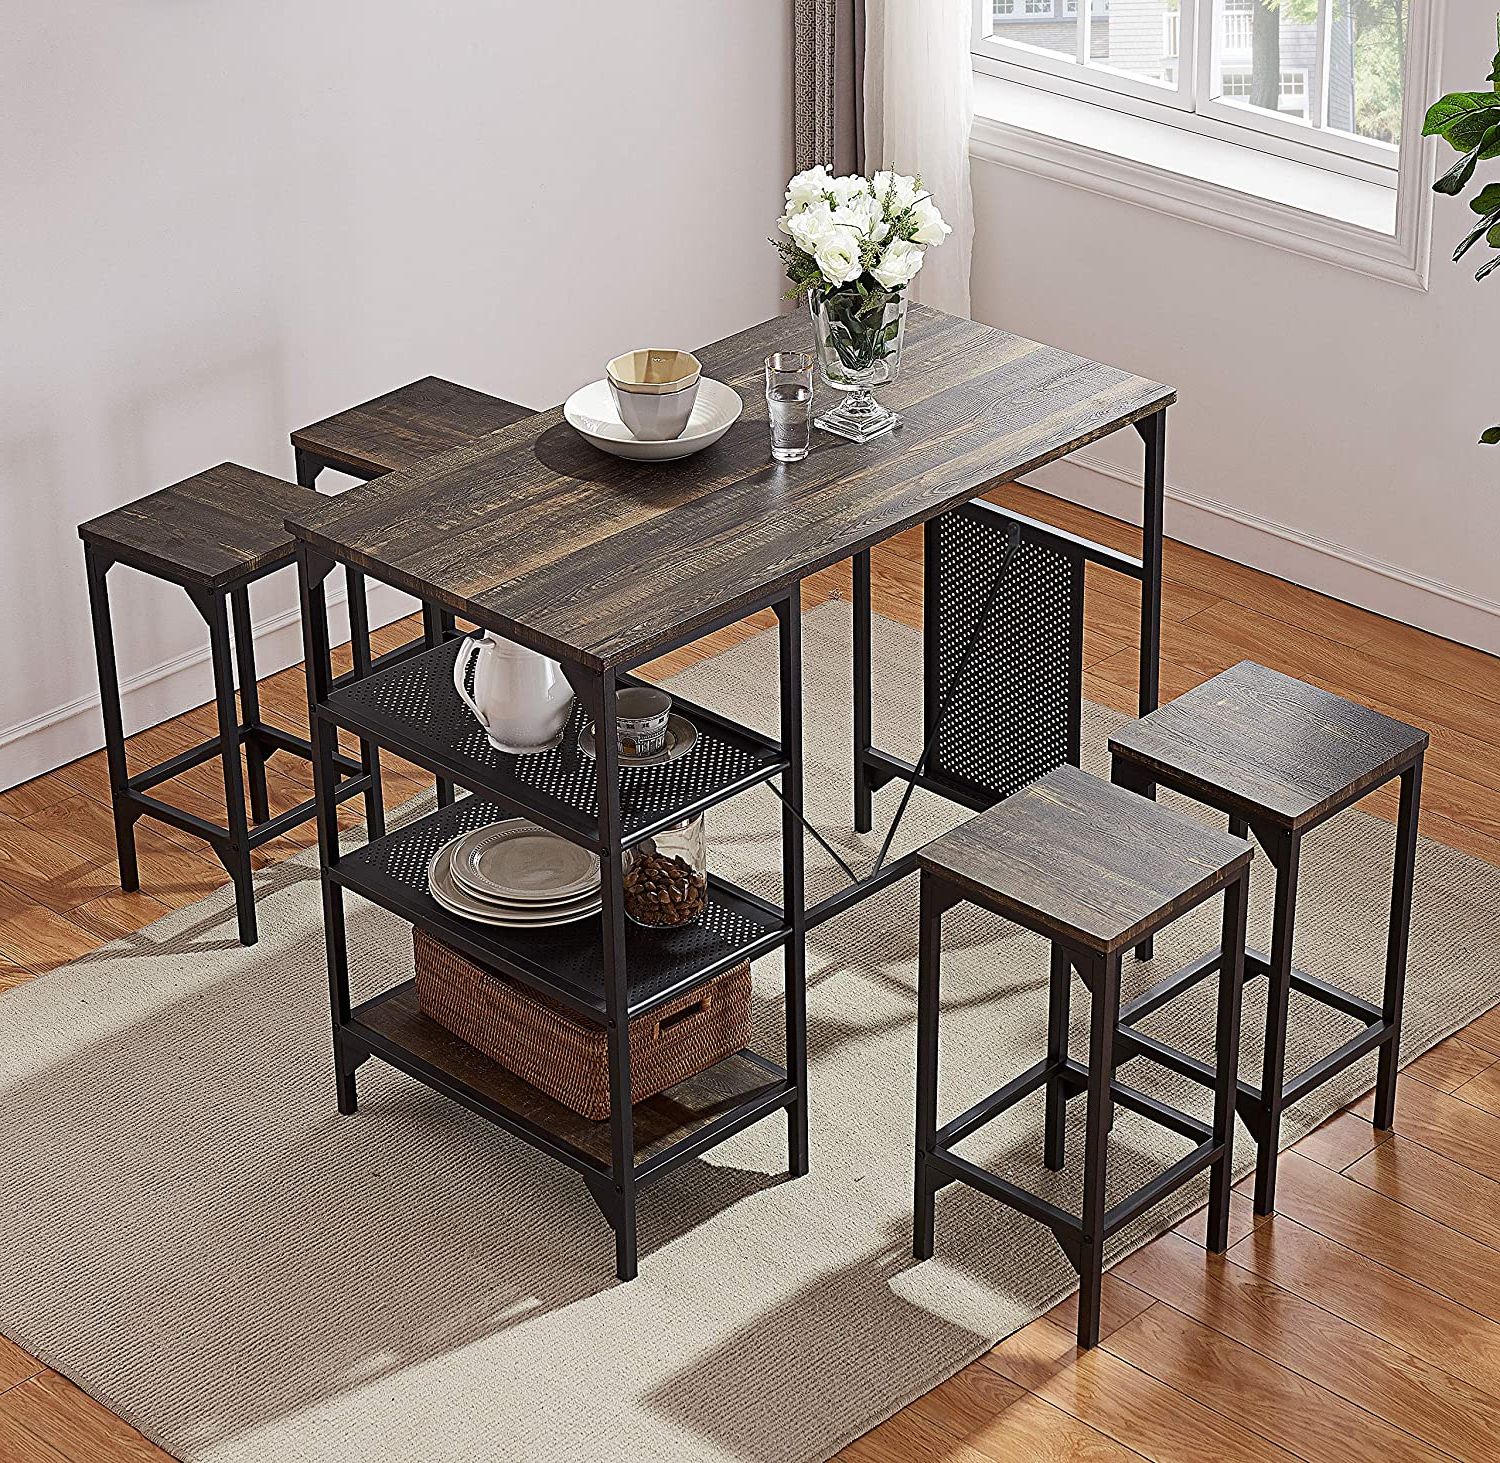 Small 5 Piece Dining Room Bar Table Set, Modern Industrial Bistro Intended For Widely Used 5 Piece Cafe Dining Sets (View 1 of 15)